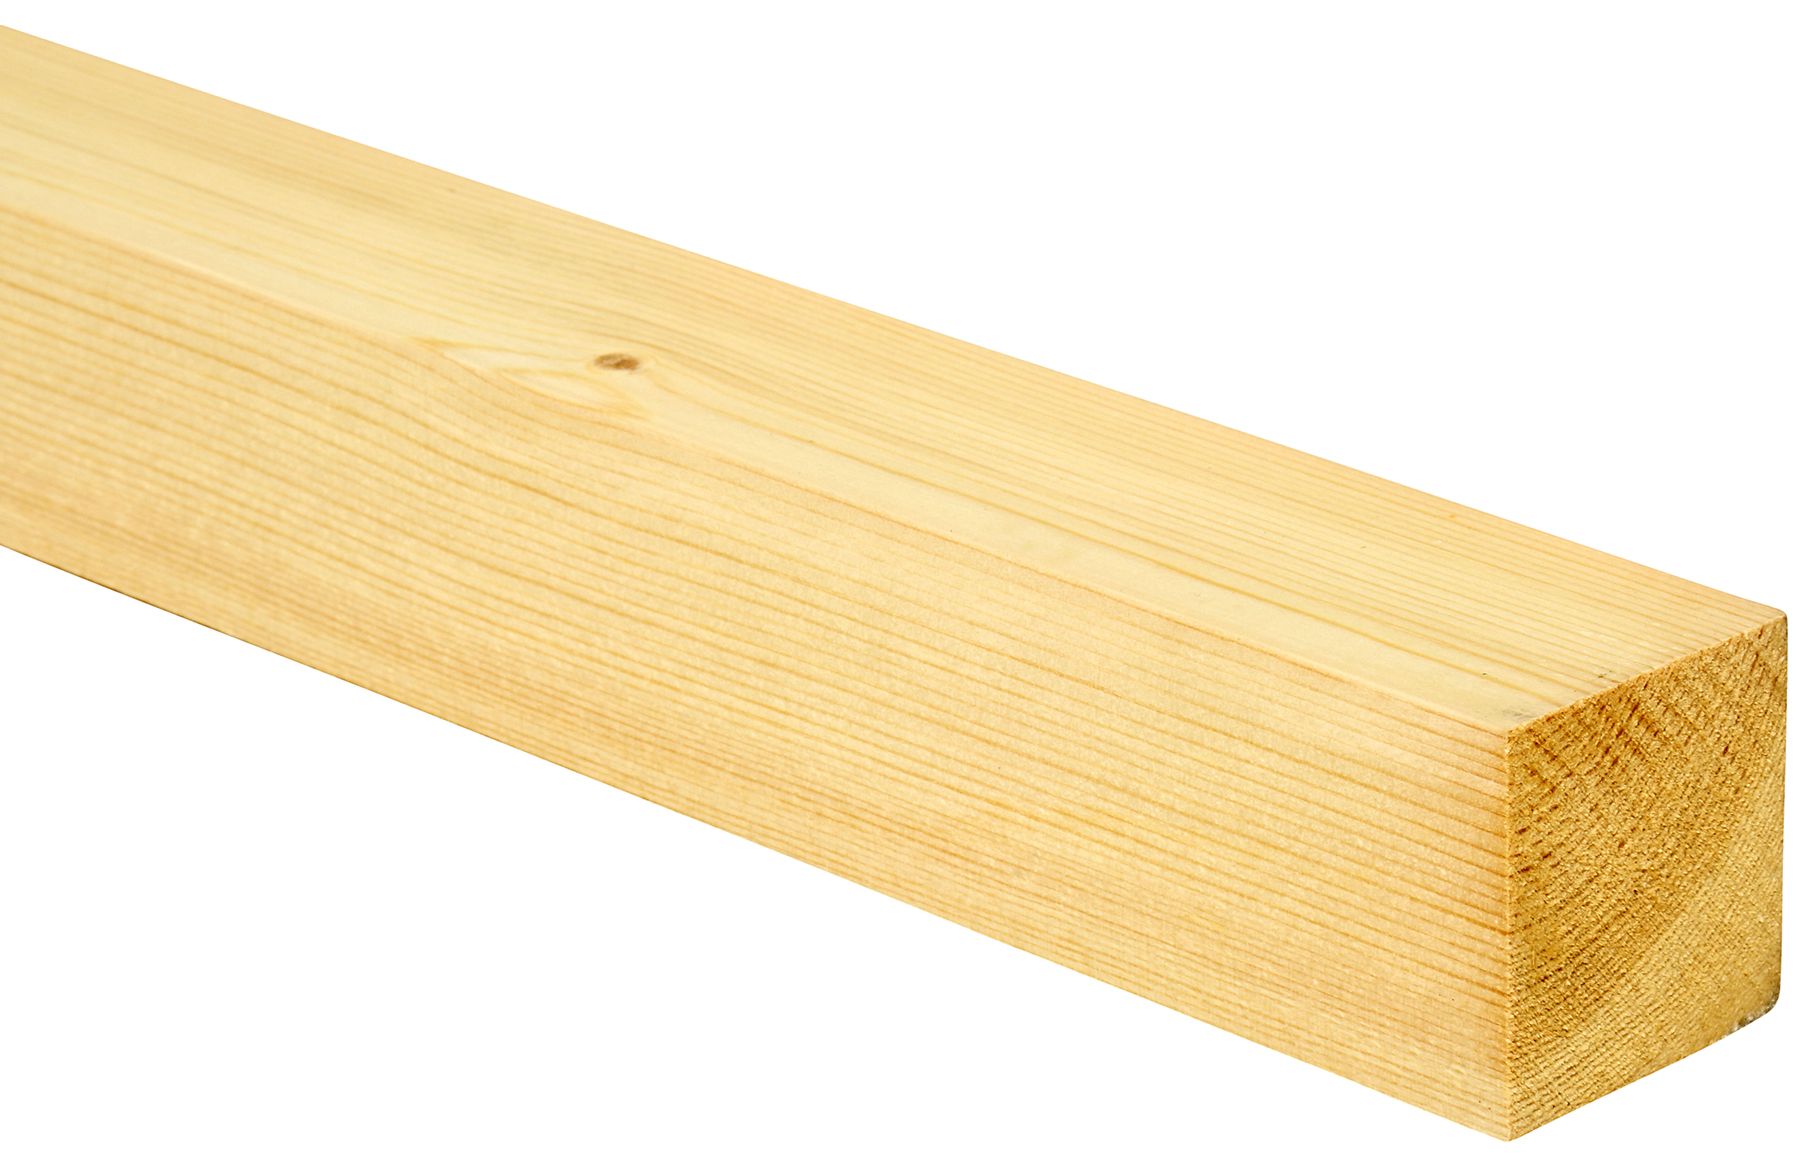 Wickes Redwood PSE Timber - 44 x 44 x 2400mm